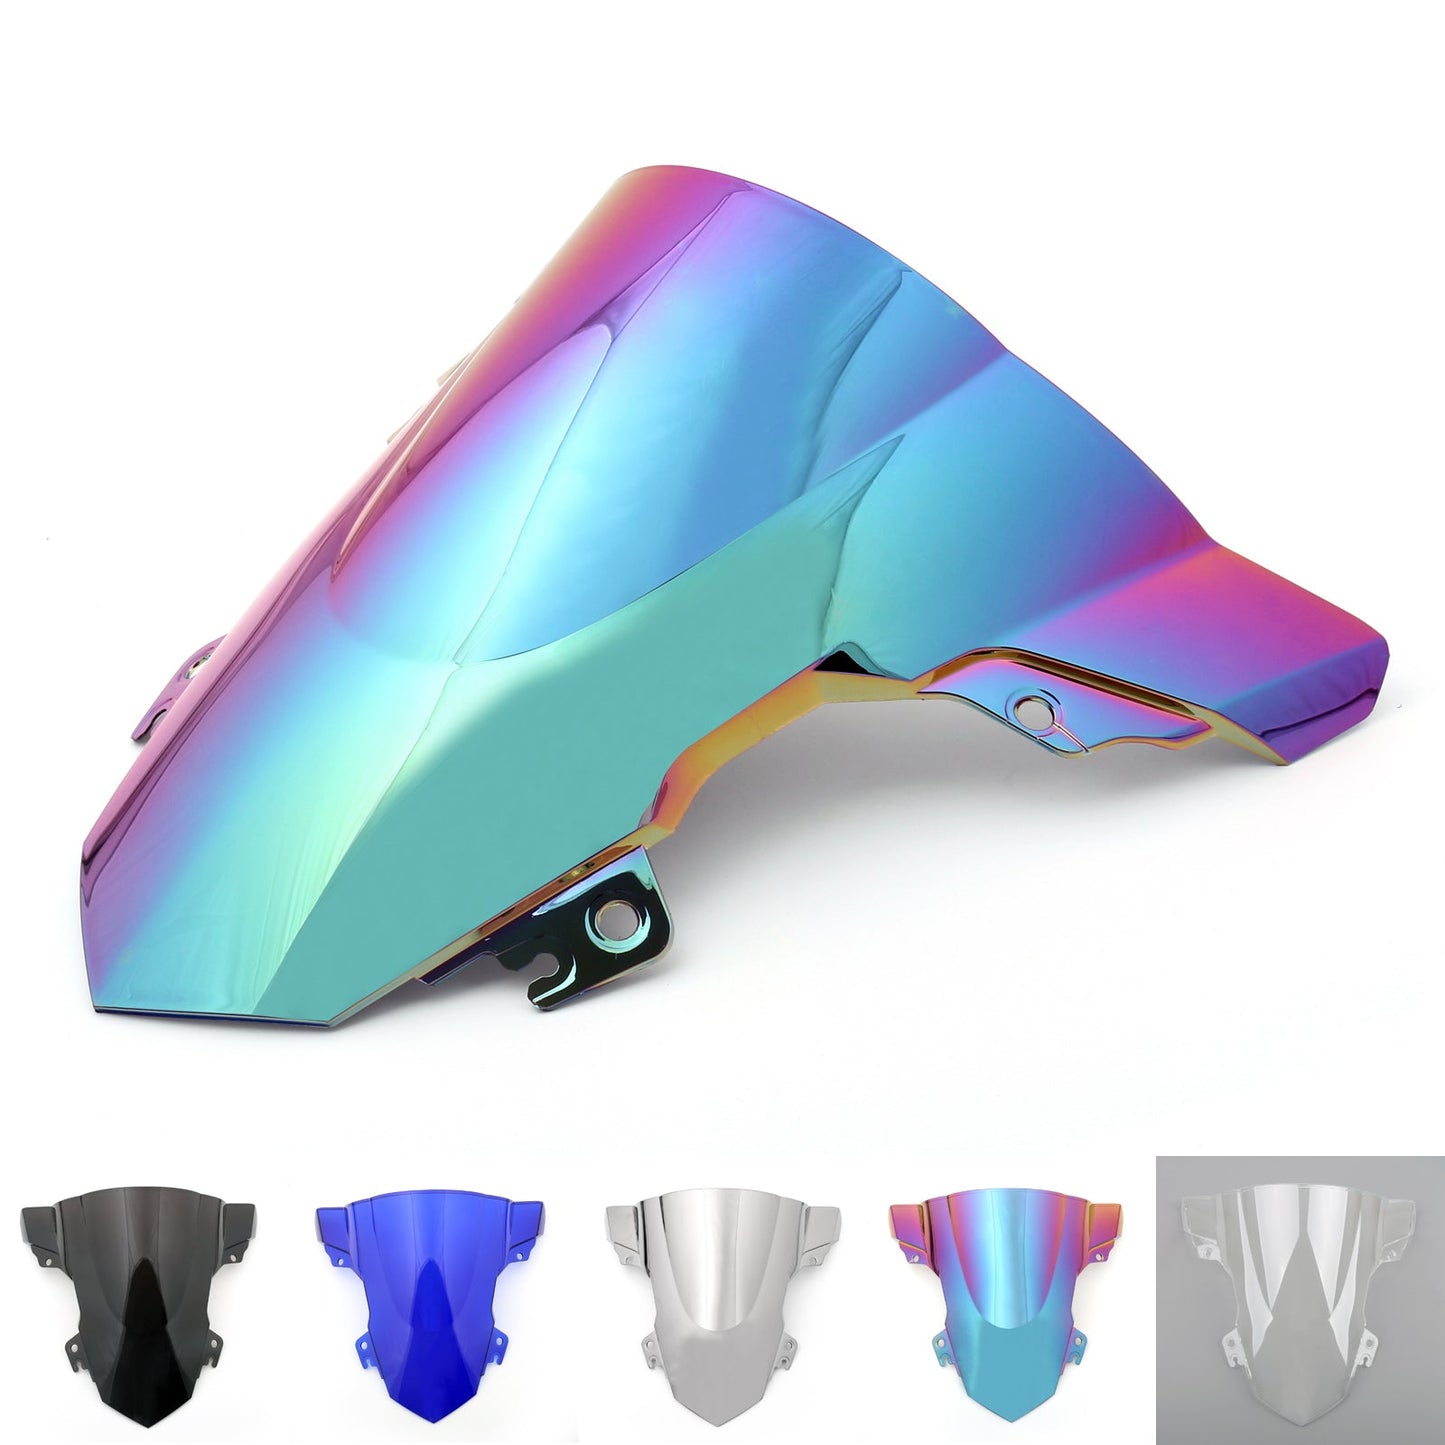 Windshield WindScreen Double Bubble For BMW S1000RR 2015-2017, 7 Color